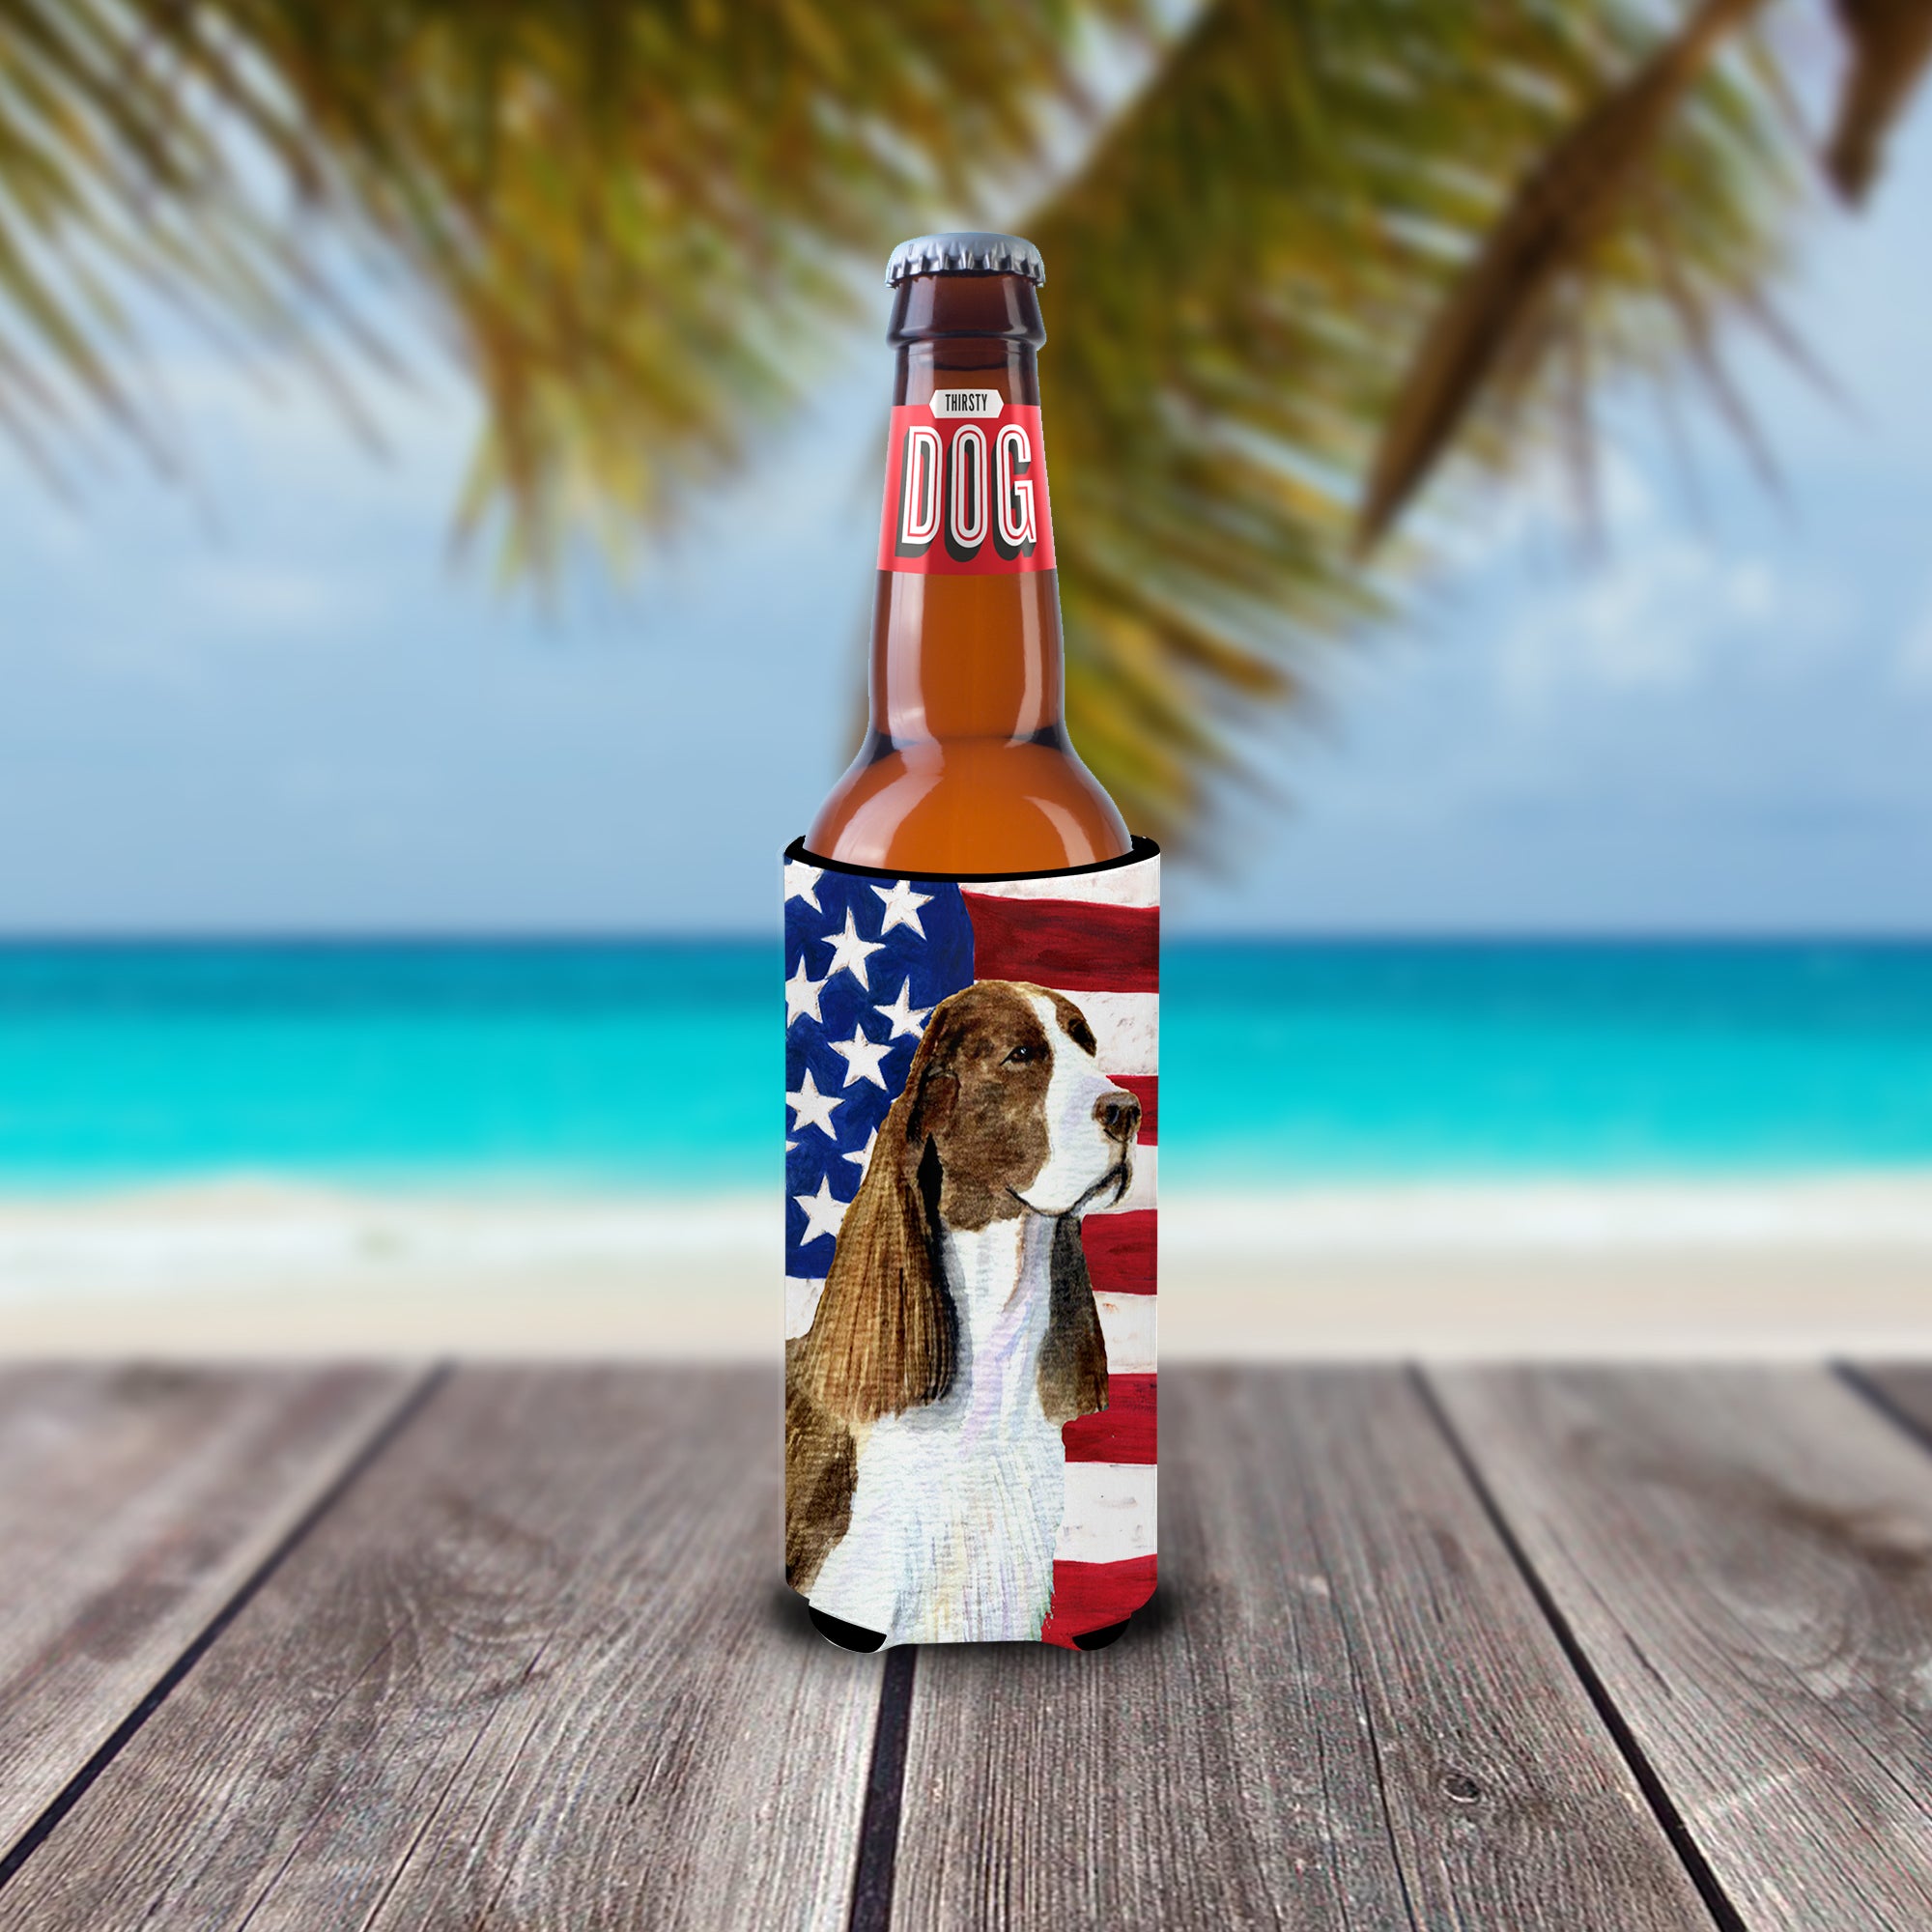 USA American Flag with Springer Spaniel Ultra Beverage Insulators for slim cans SS4040MUK